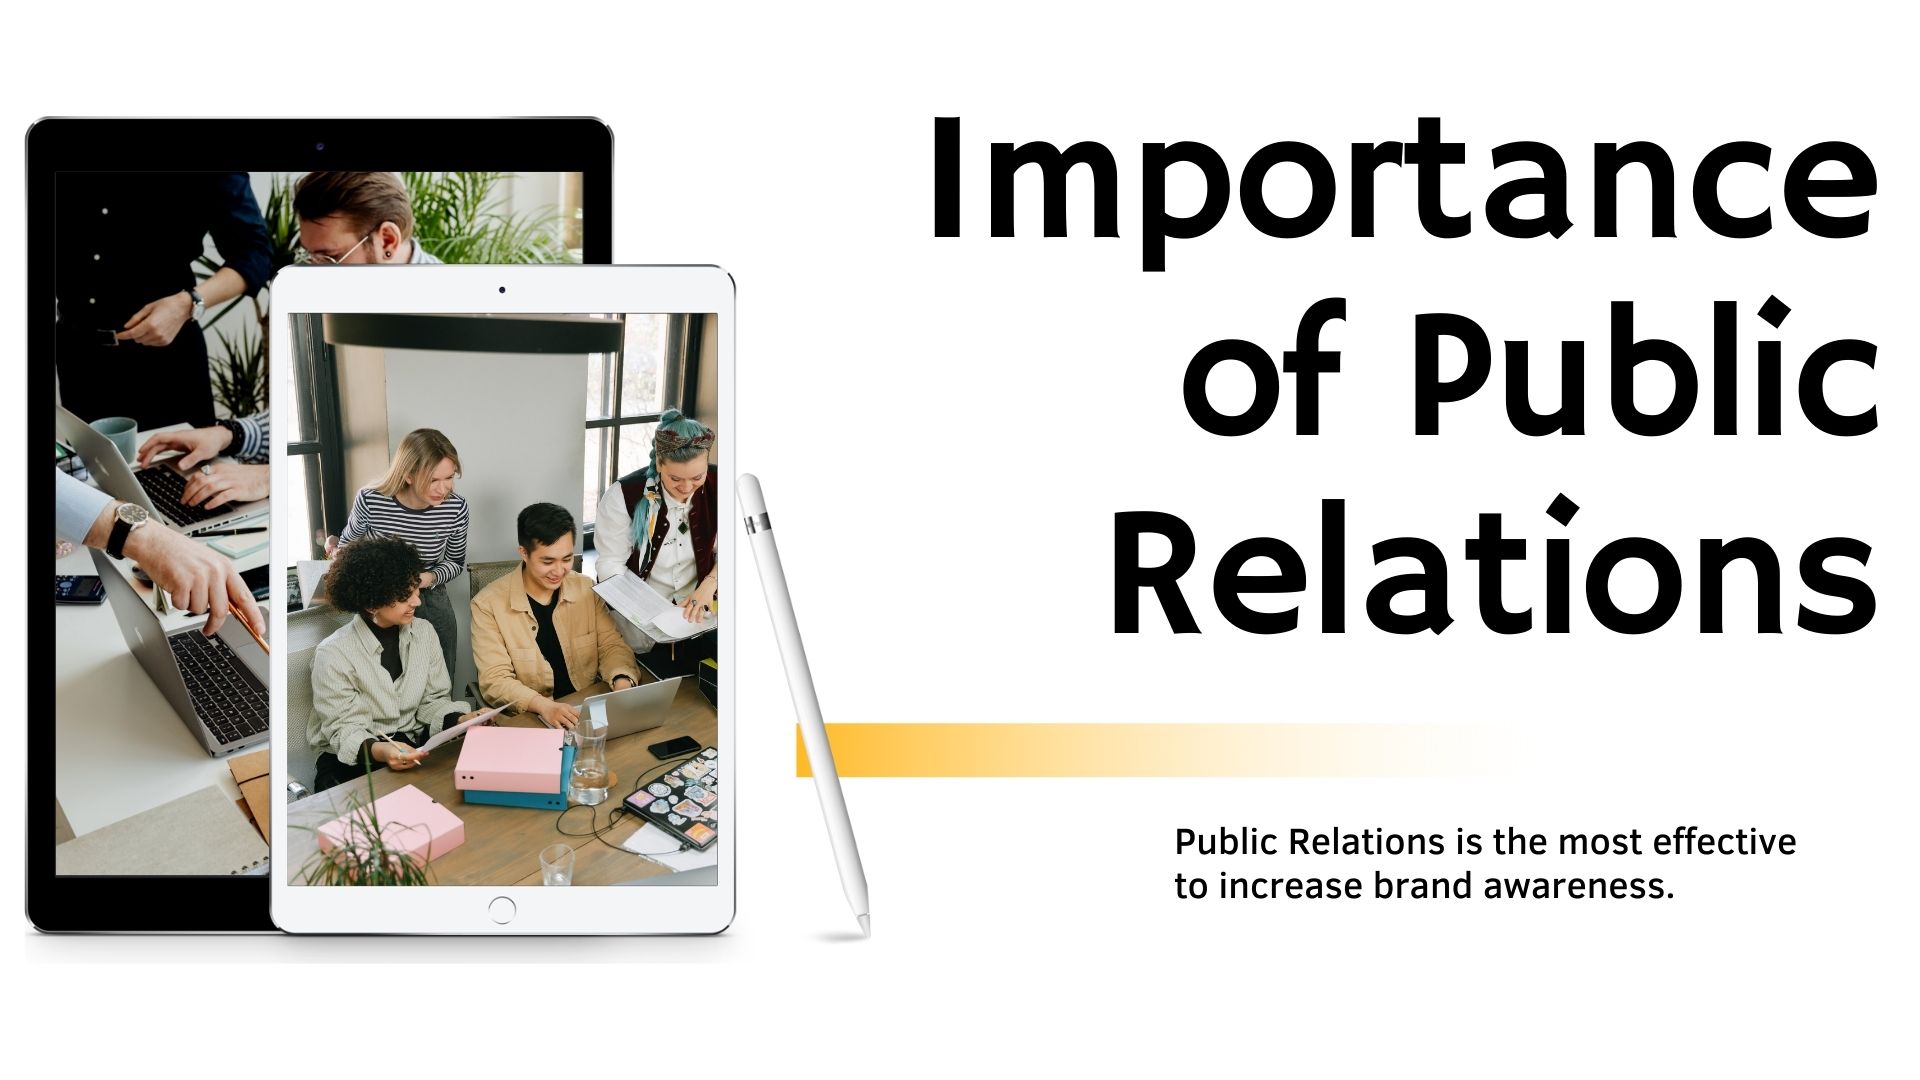 Importance of Public Relations